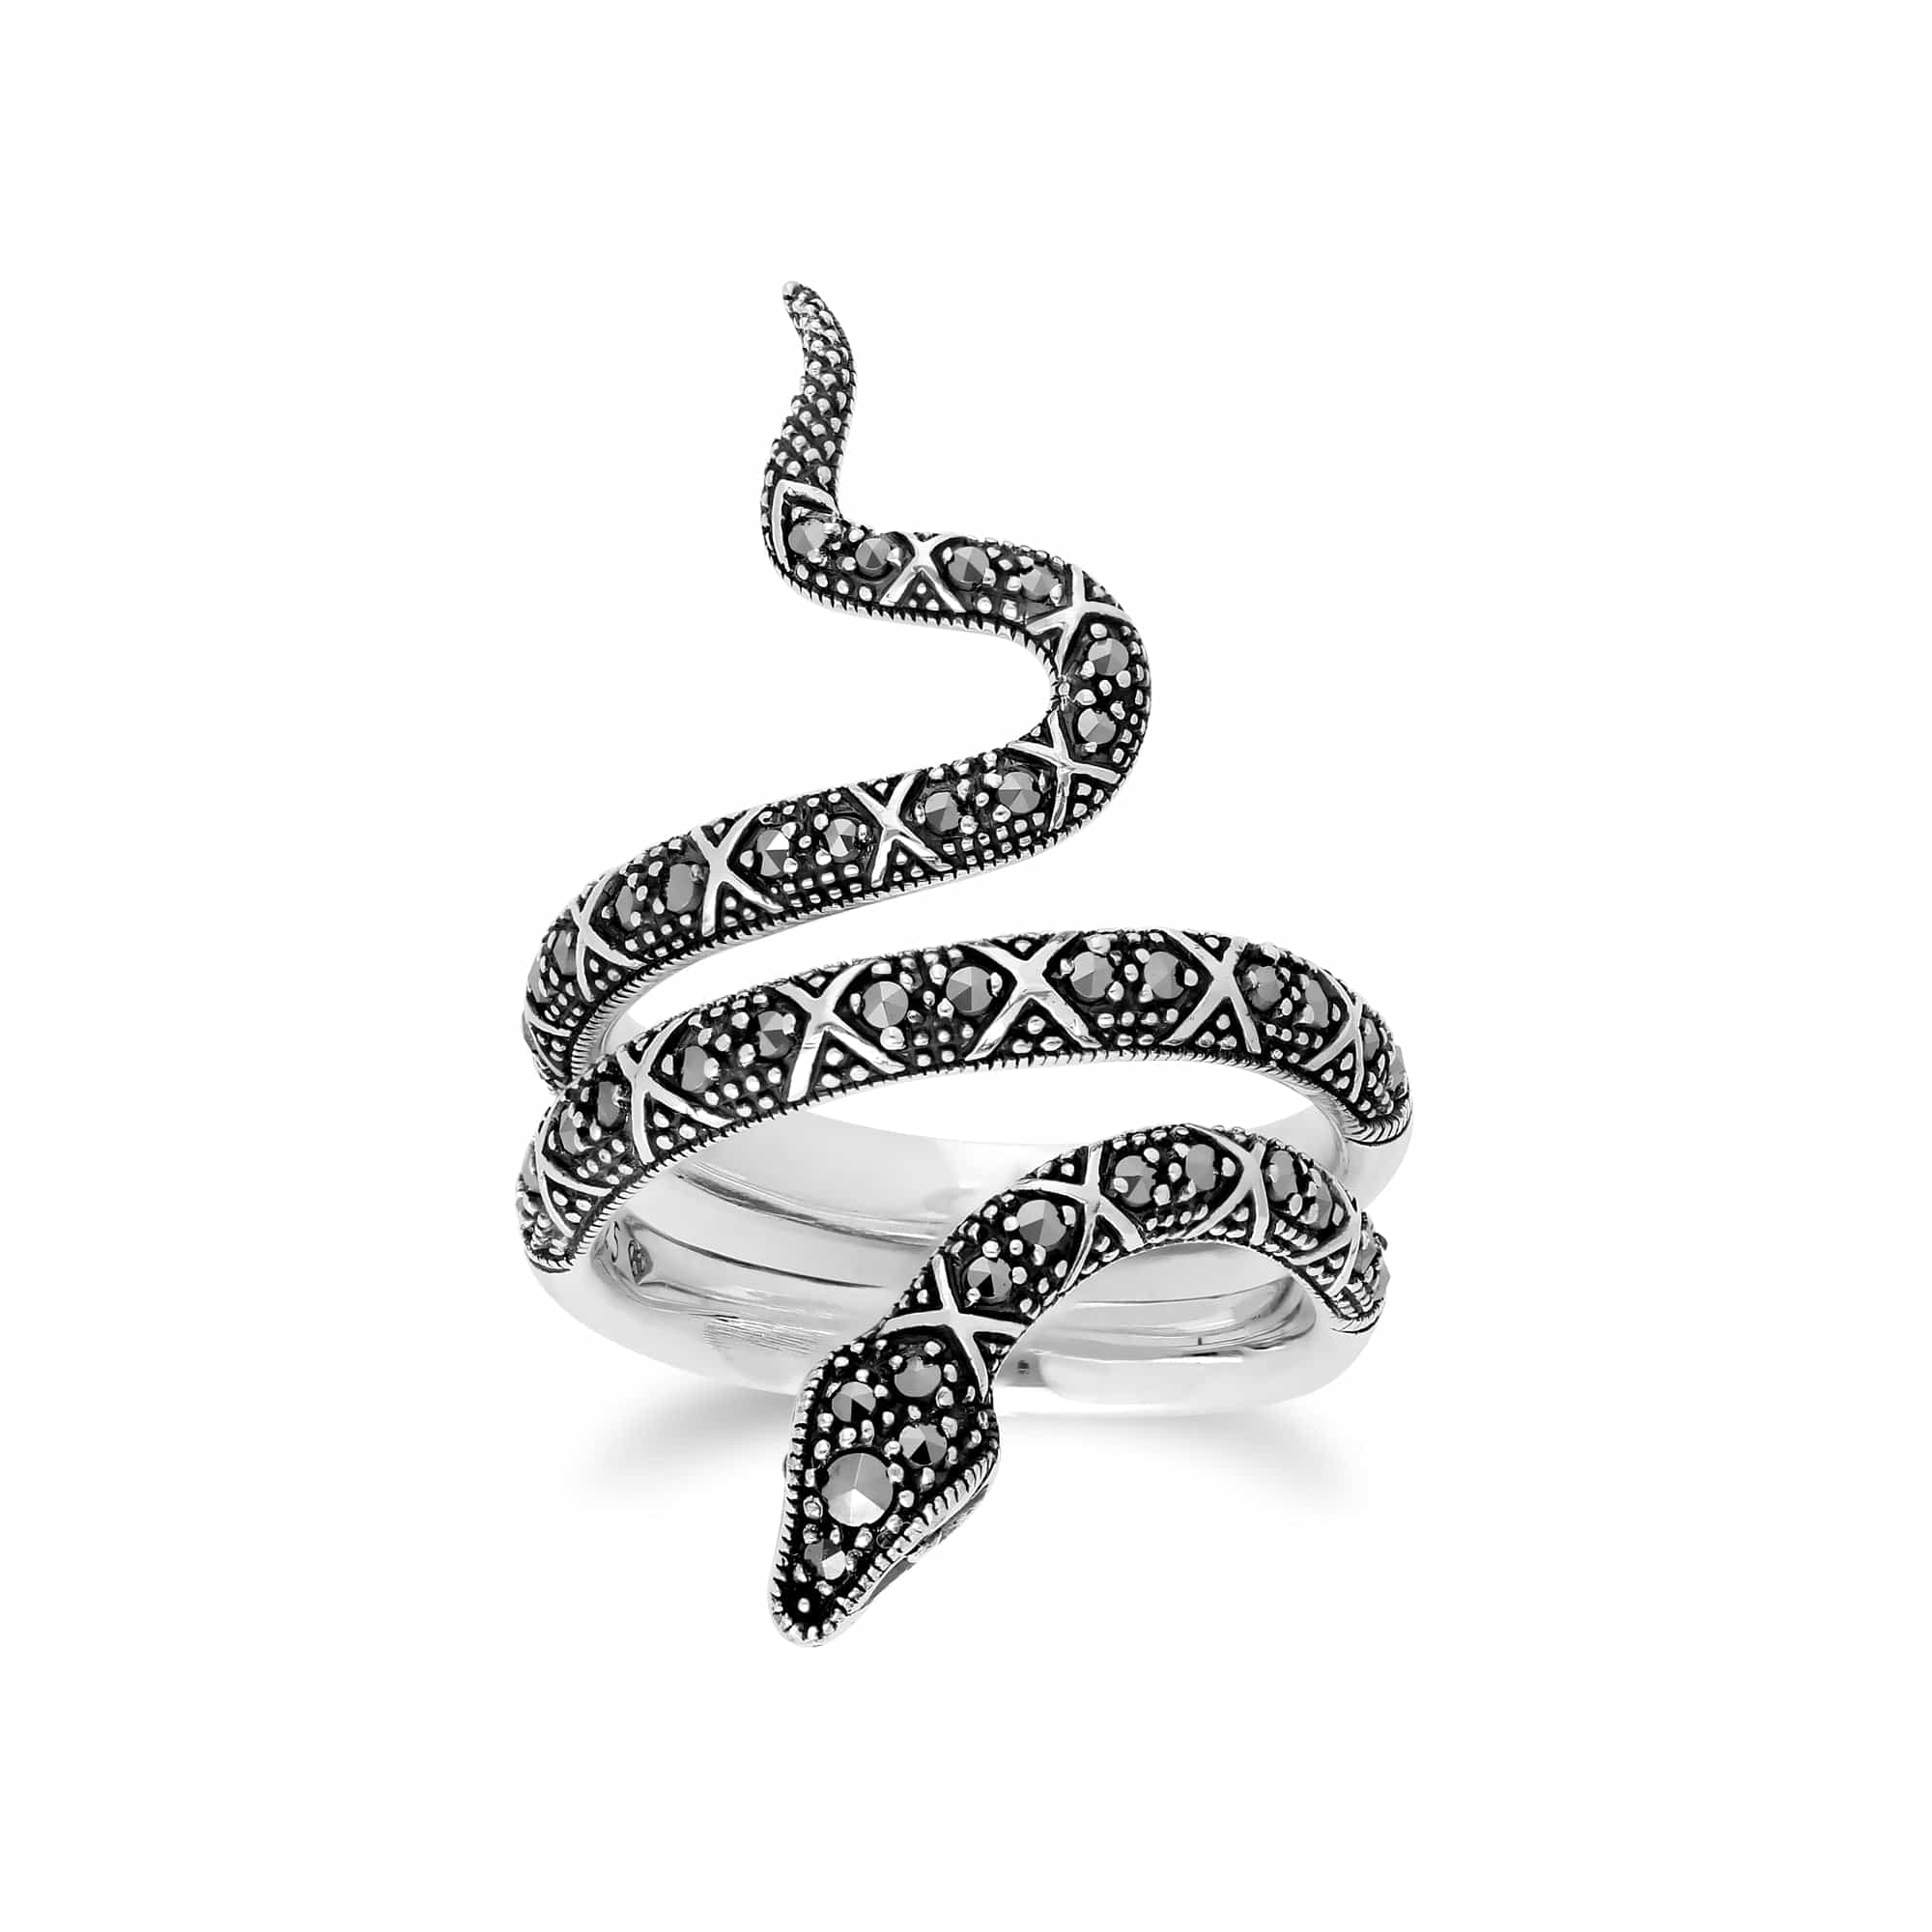 214R580201925 Art Nouveau Style Round Marcasite Snake Statement Ring in 925 Sterling Silver 1